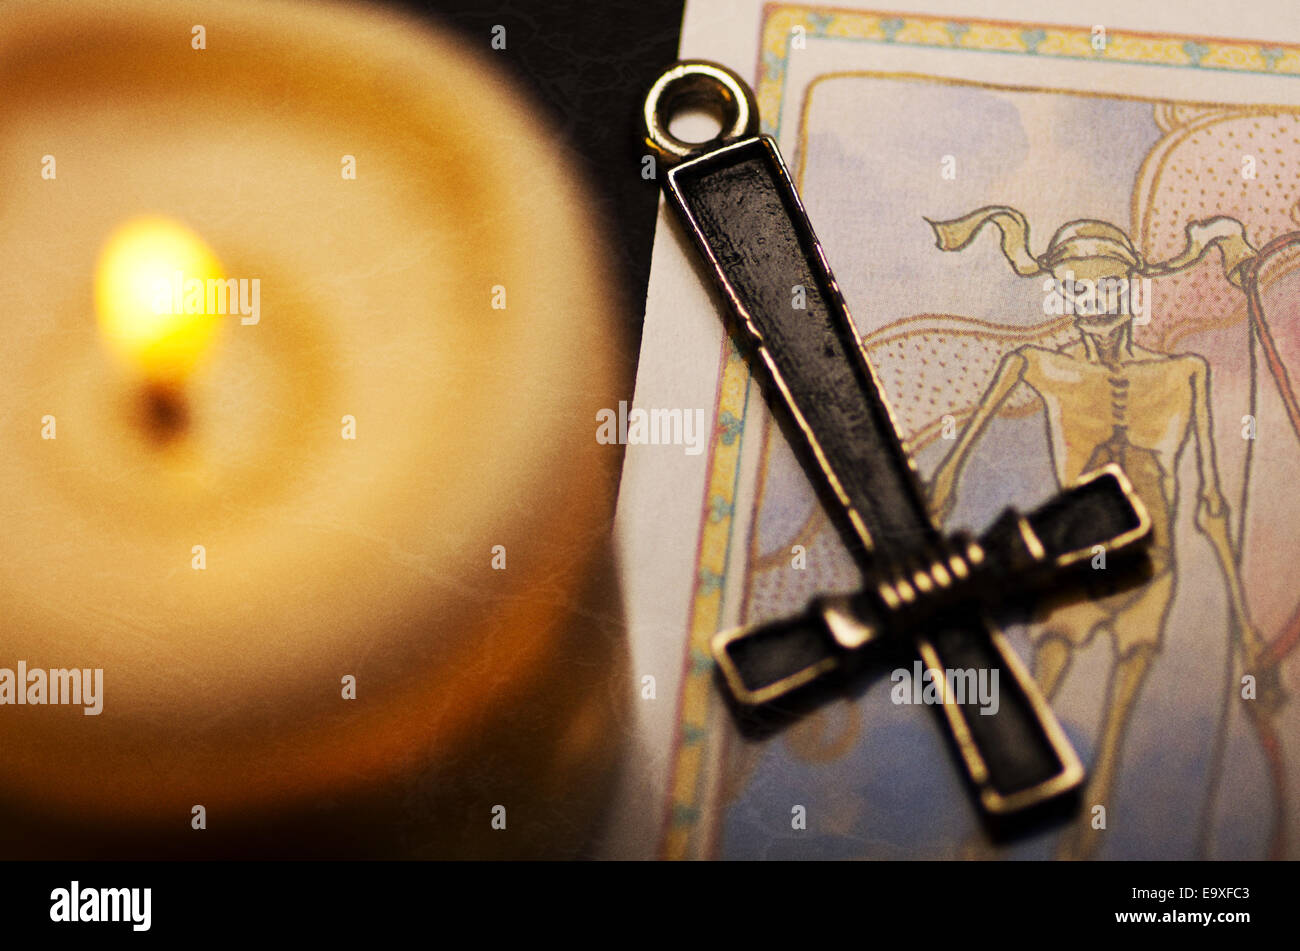 Inverted cross, tarot card and candle. Stock Photo